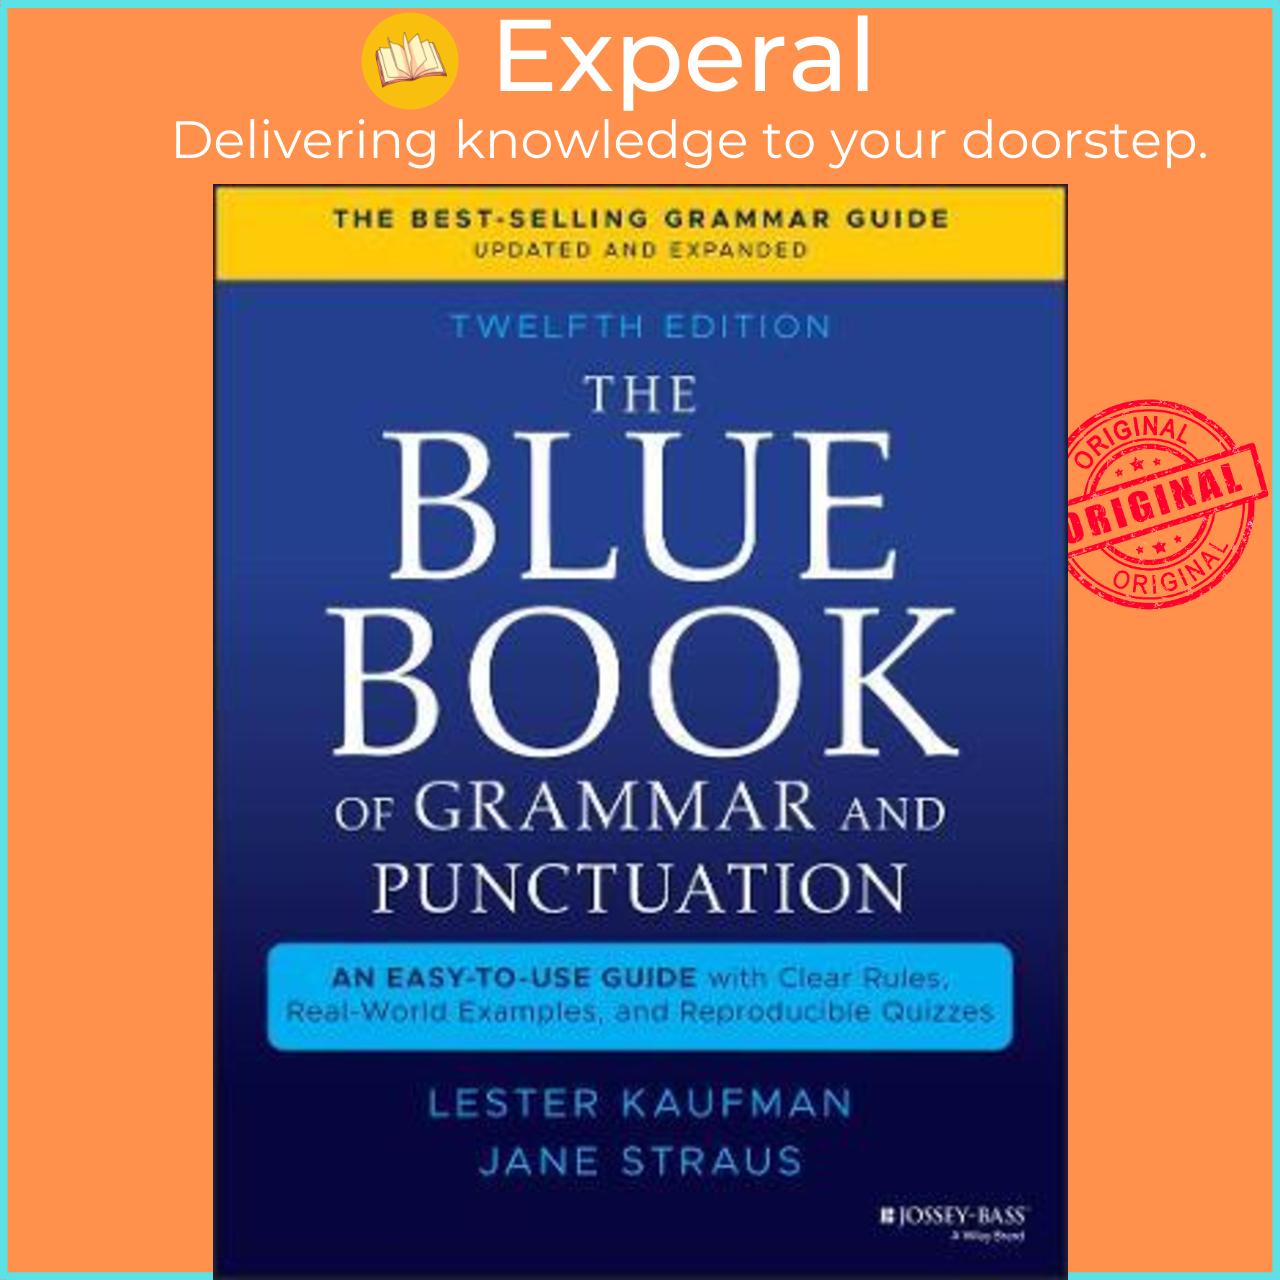 Hình ảnh Sách - The Blue Book of Grammar and Punctuation: An Easy-to-Use Guide with Cle by Lester Kaufman (US edition, paperback)